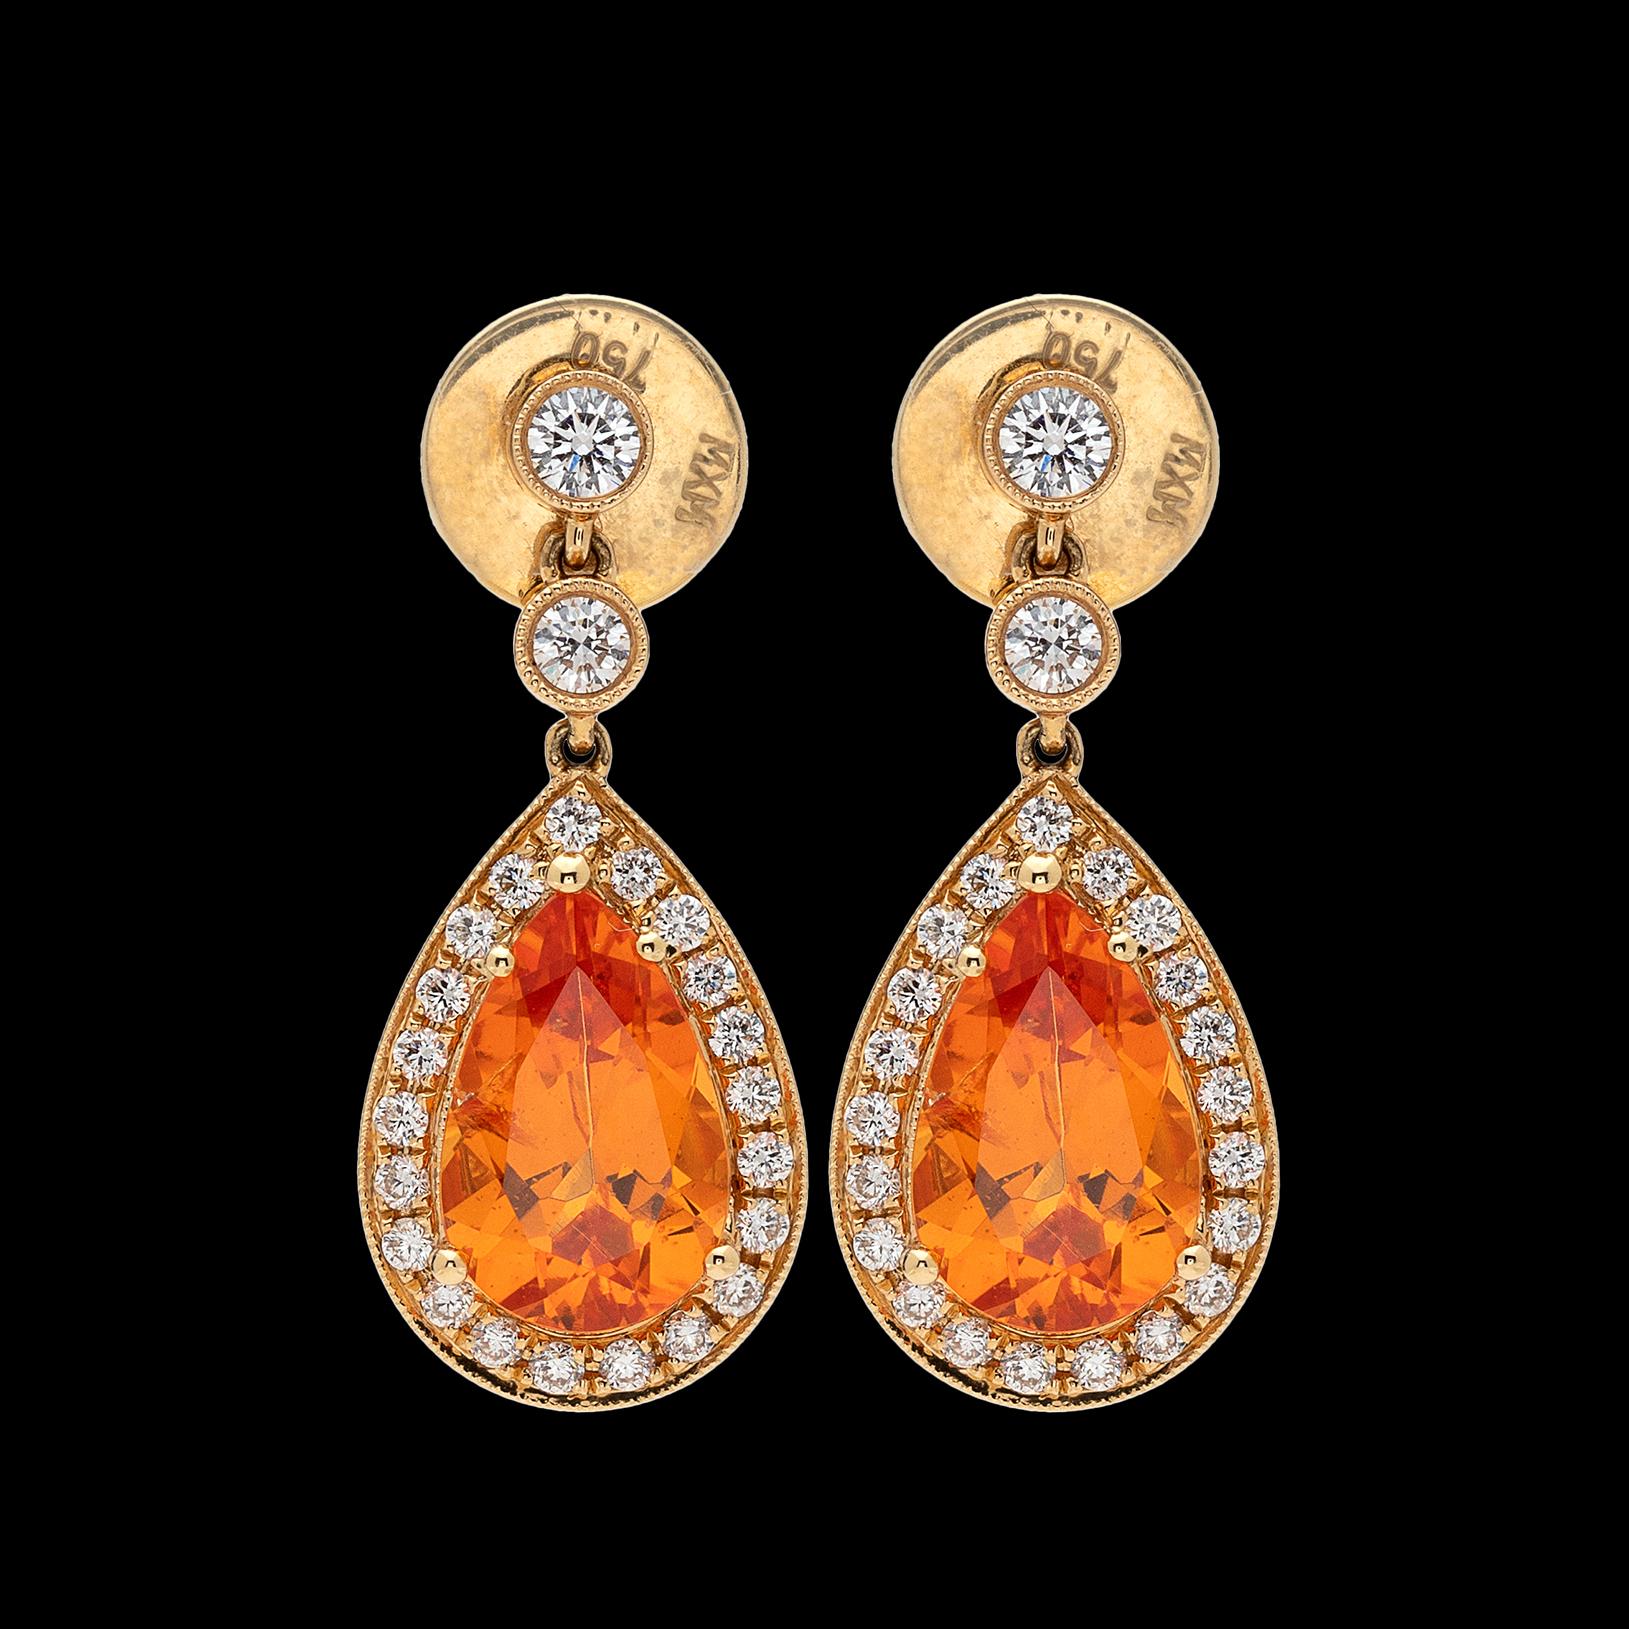 Set in 18k yellow gold, the drop earrings feature two beautiful yellowish orange pear-shaped Mandarin garnets, weighing together an estimated 5.16 carats, each framed and topped by round brilliant-cut diamonds, weighing in total approximately